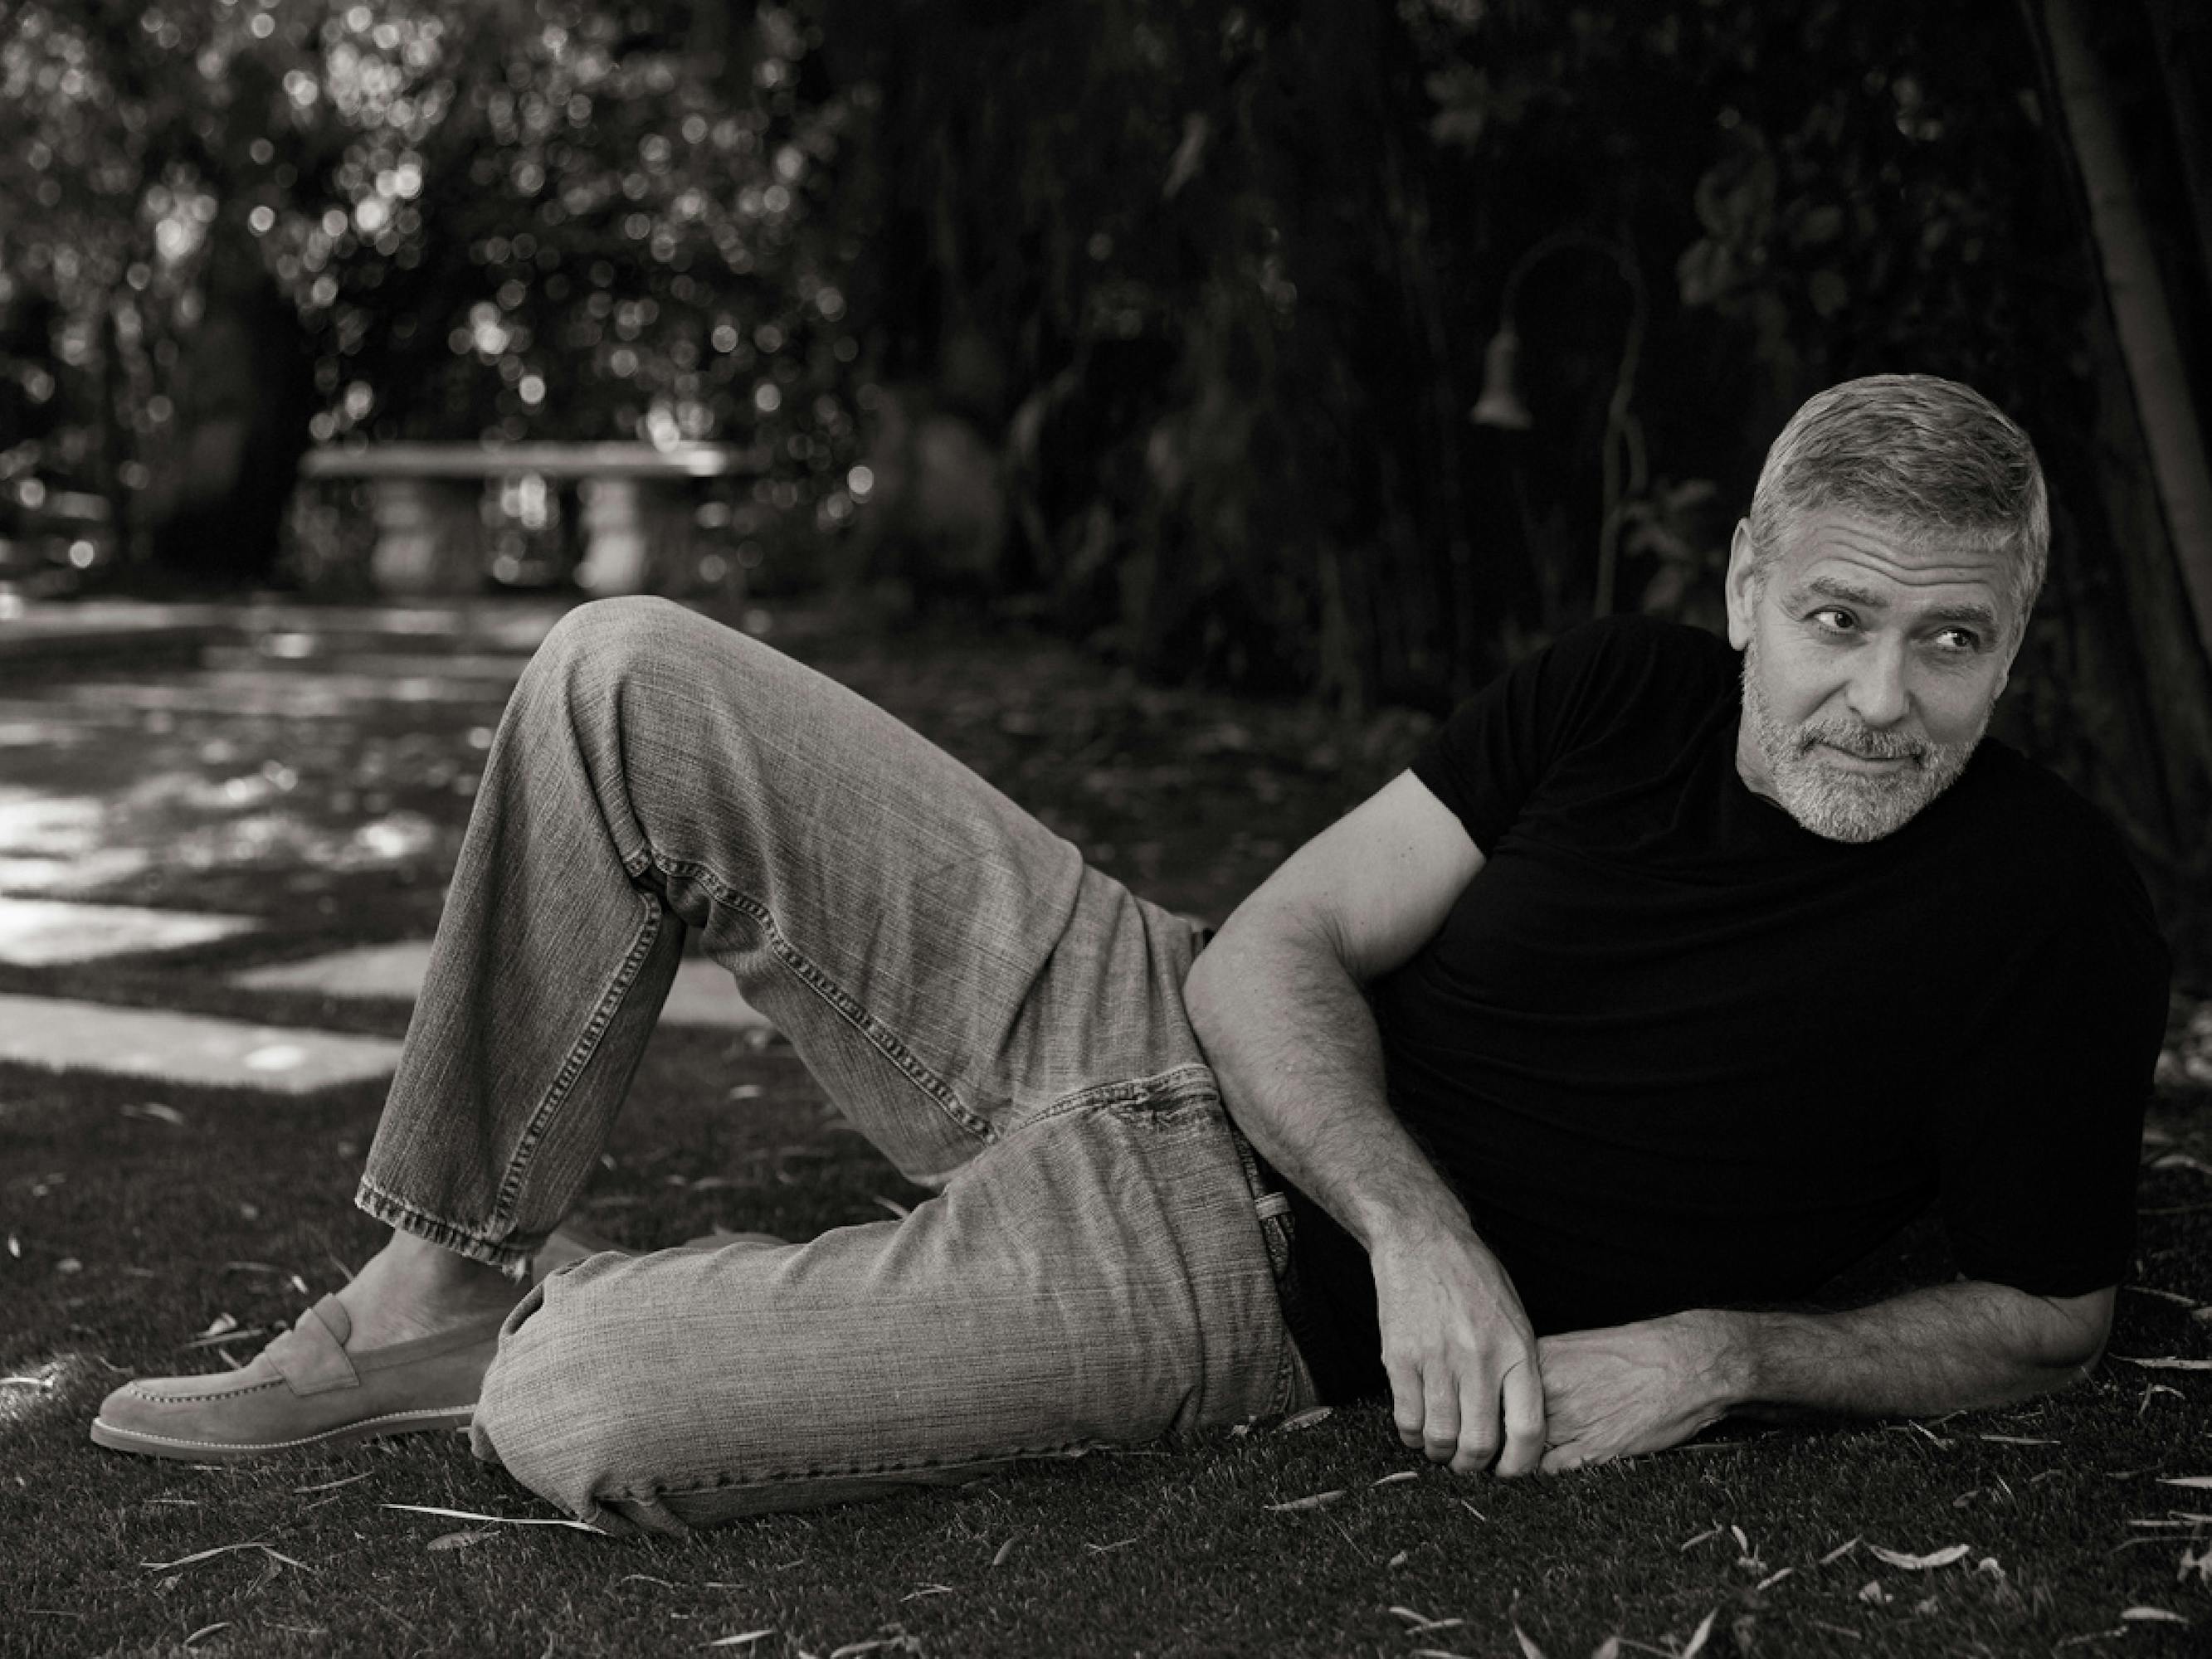 George Clooney shot in black-and-white, lounging on his lawn. He looks off into the distance. 